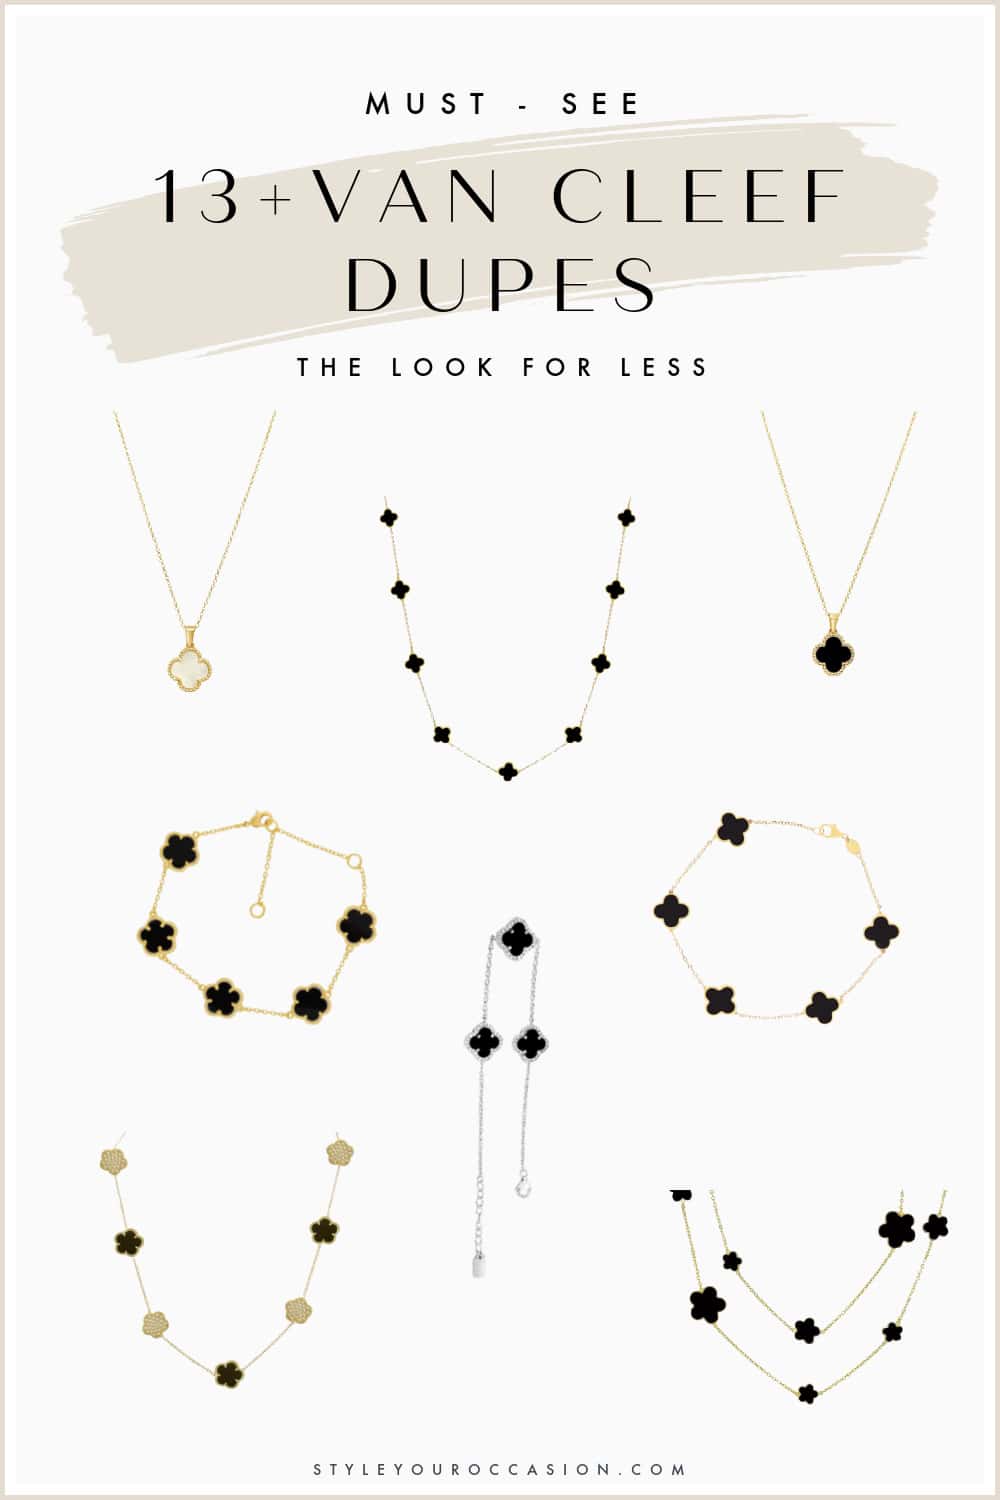 An image board of Van Cleef jewelry dupes including necklaces and bracelets